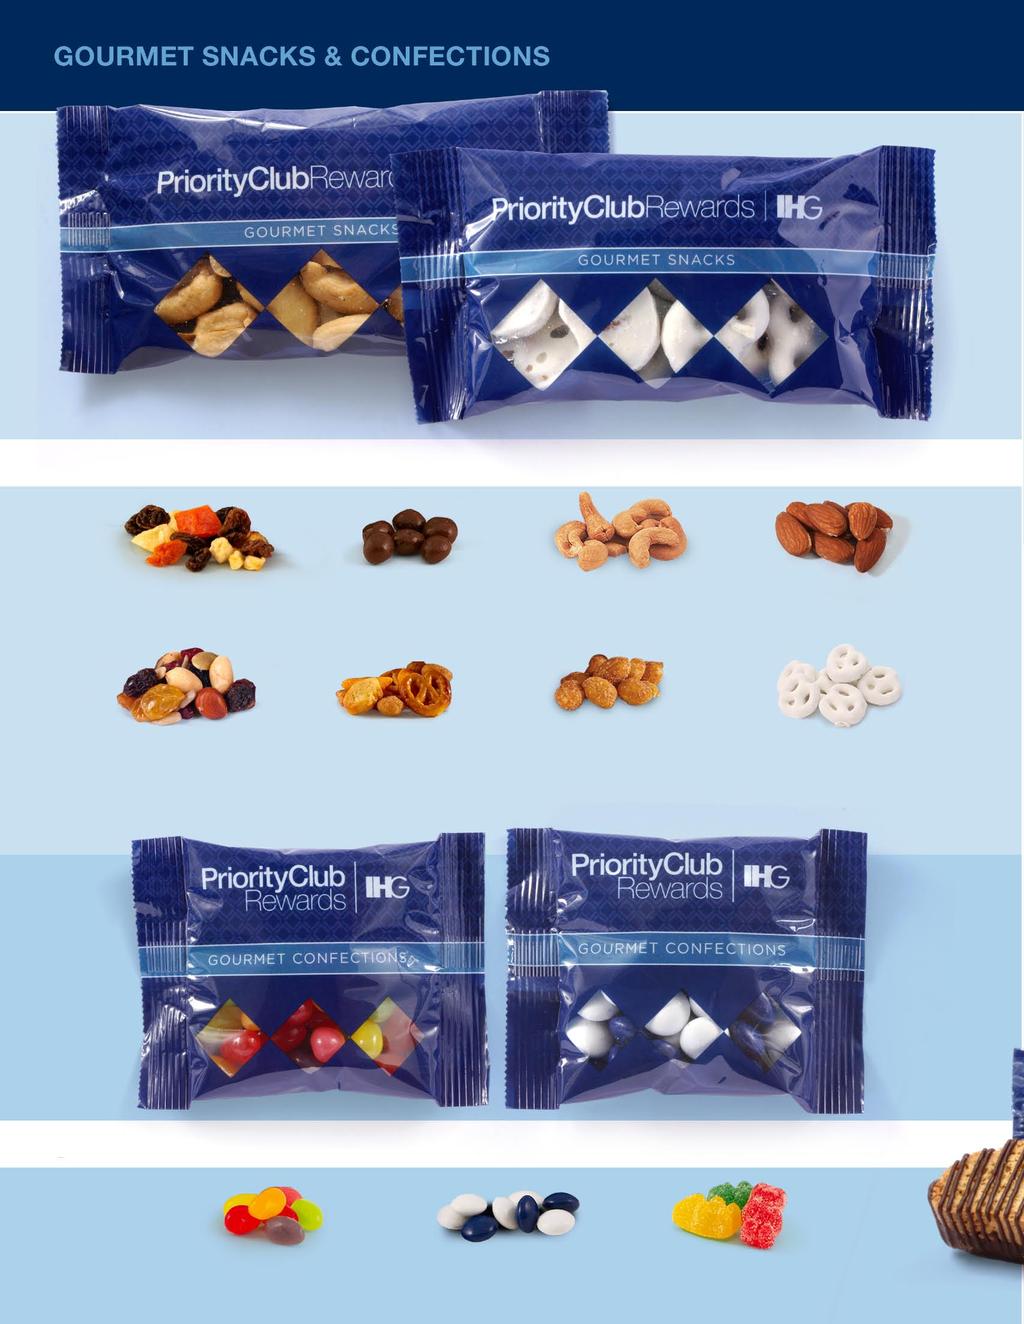 gourmet snacks (Large BagS) choose your fill P1 > Dried Fruit Snack Bag (1.25oz) $0.75 each 250 per case P2 > Chocolate Covered Raisin Snack Bag (1.25 oz) $0.